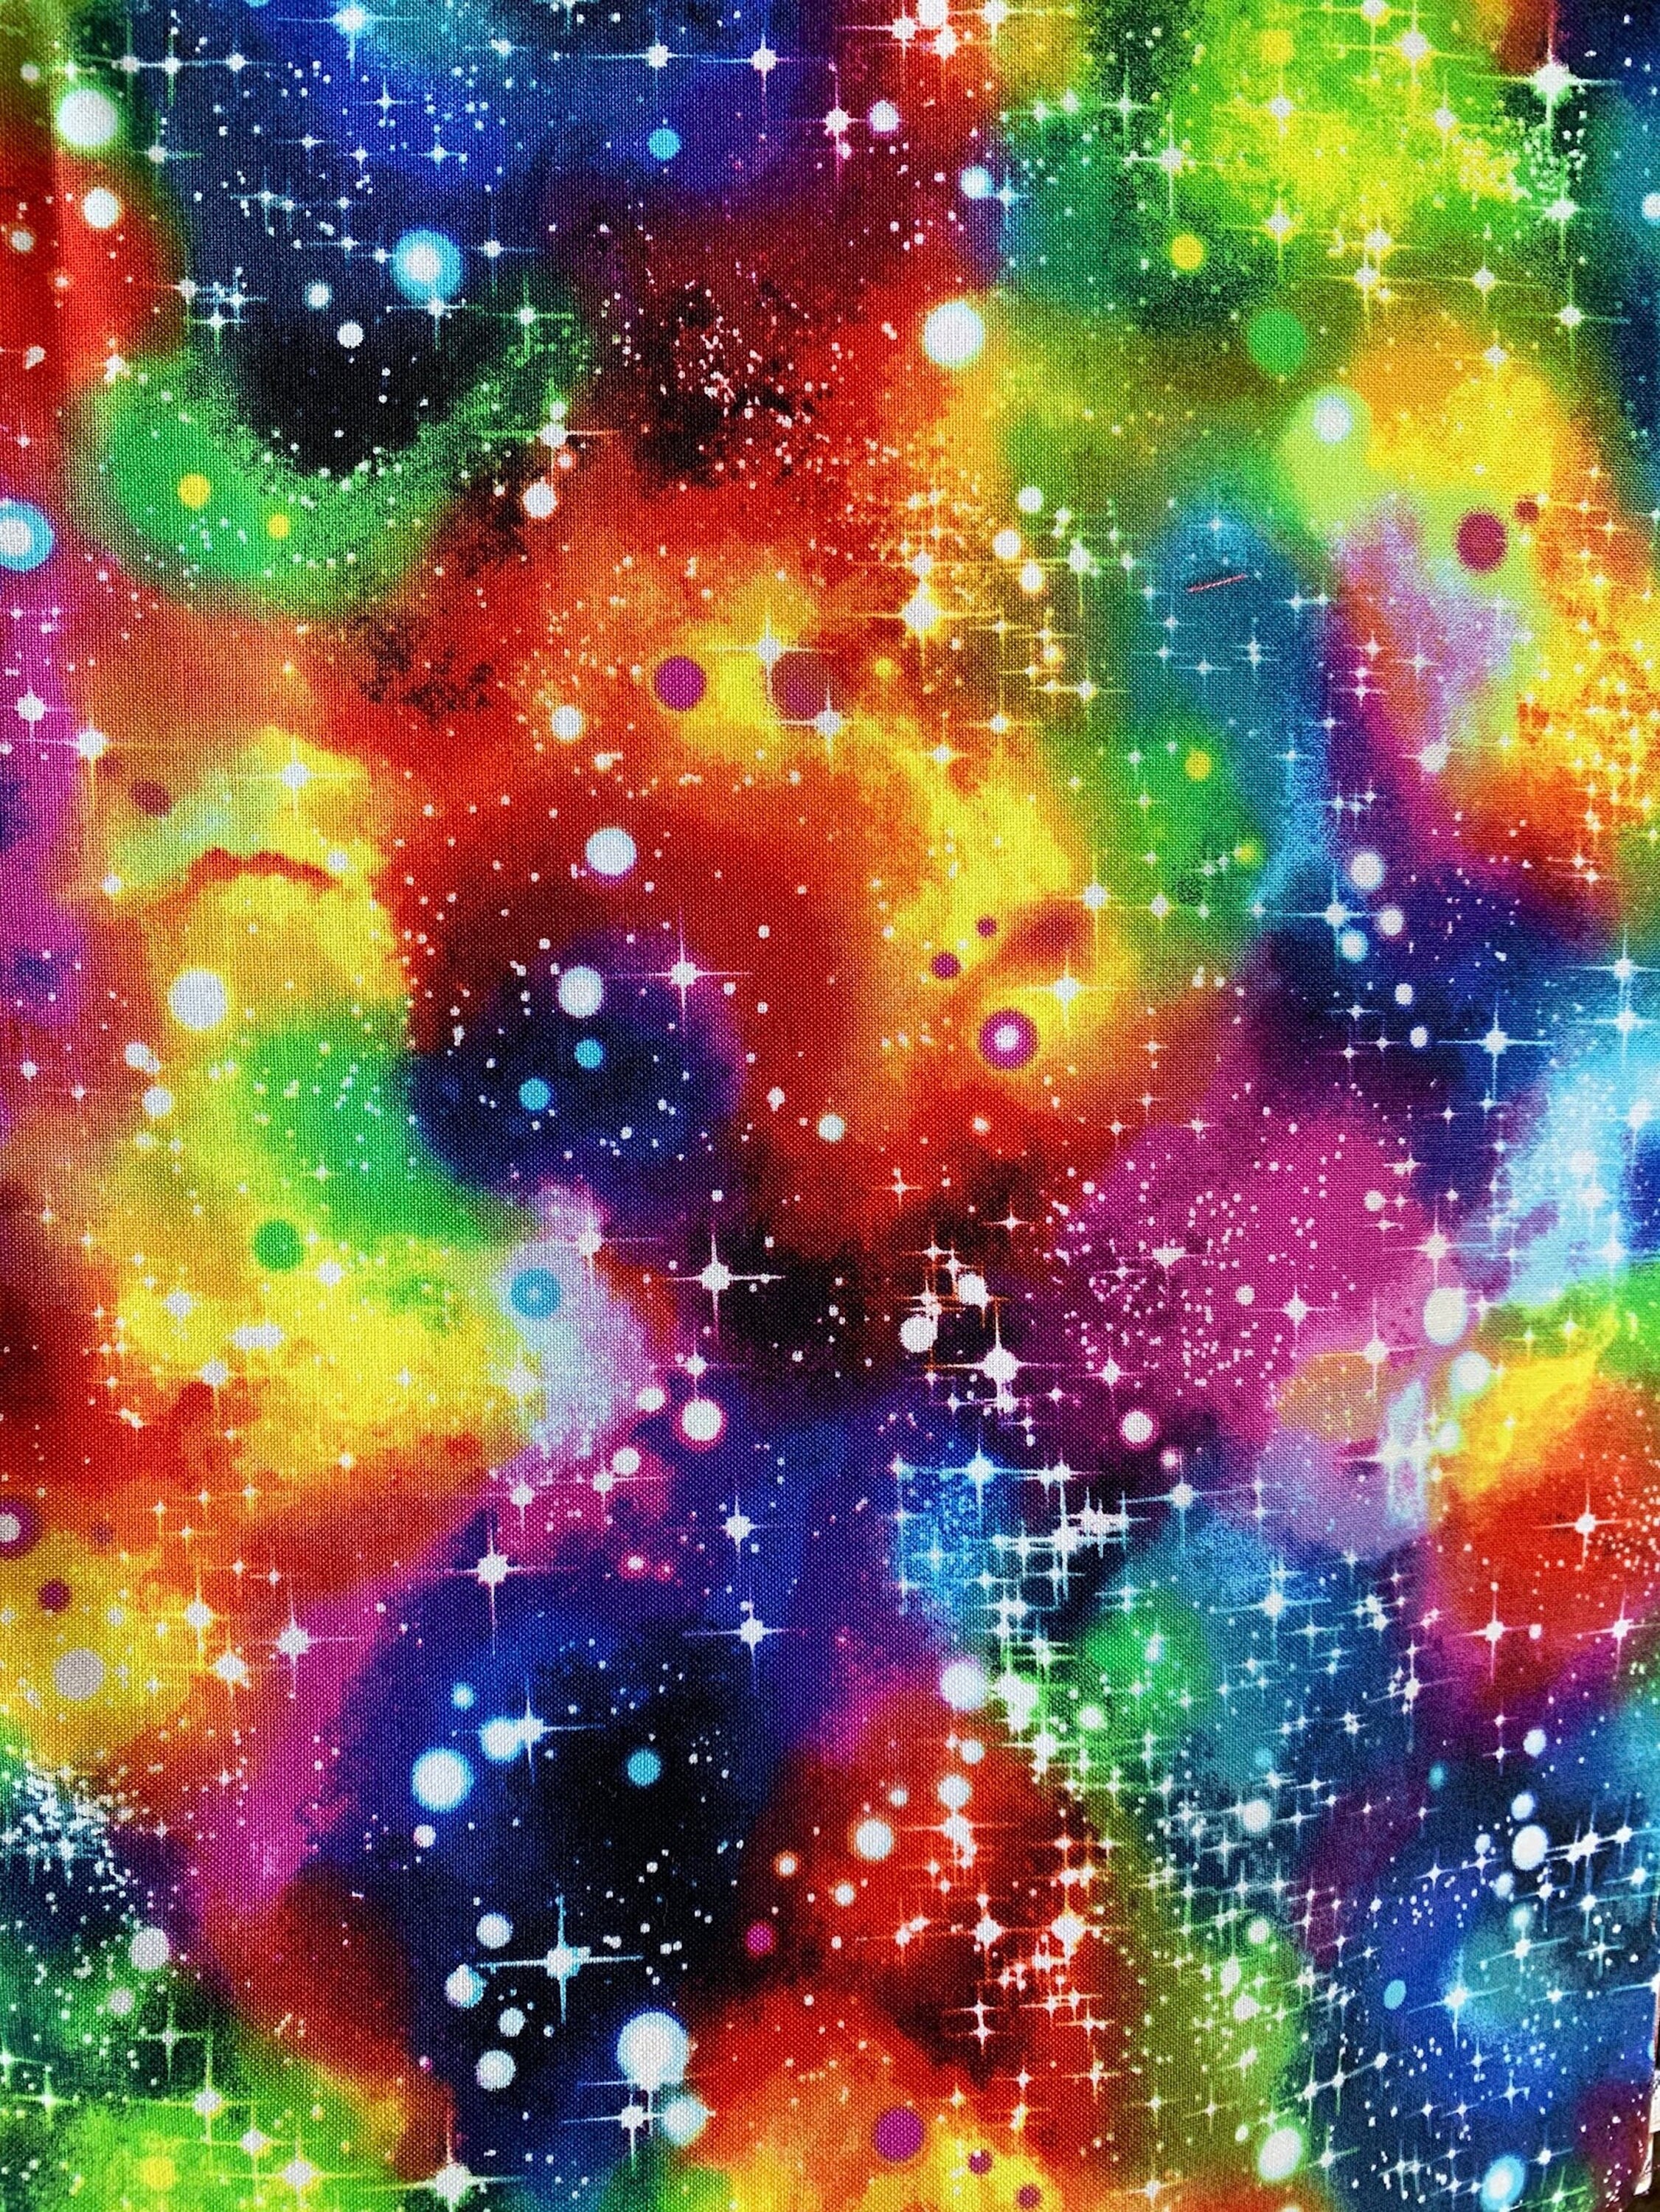 1/4 Yard Rainbow Cosmos Galaxy Space Cotton Fabric By the | Etsy